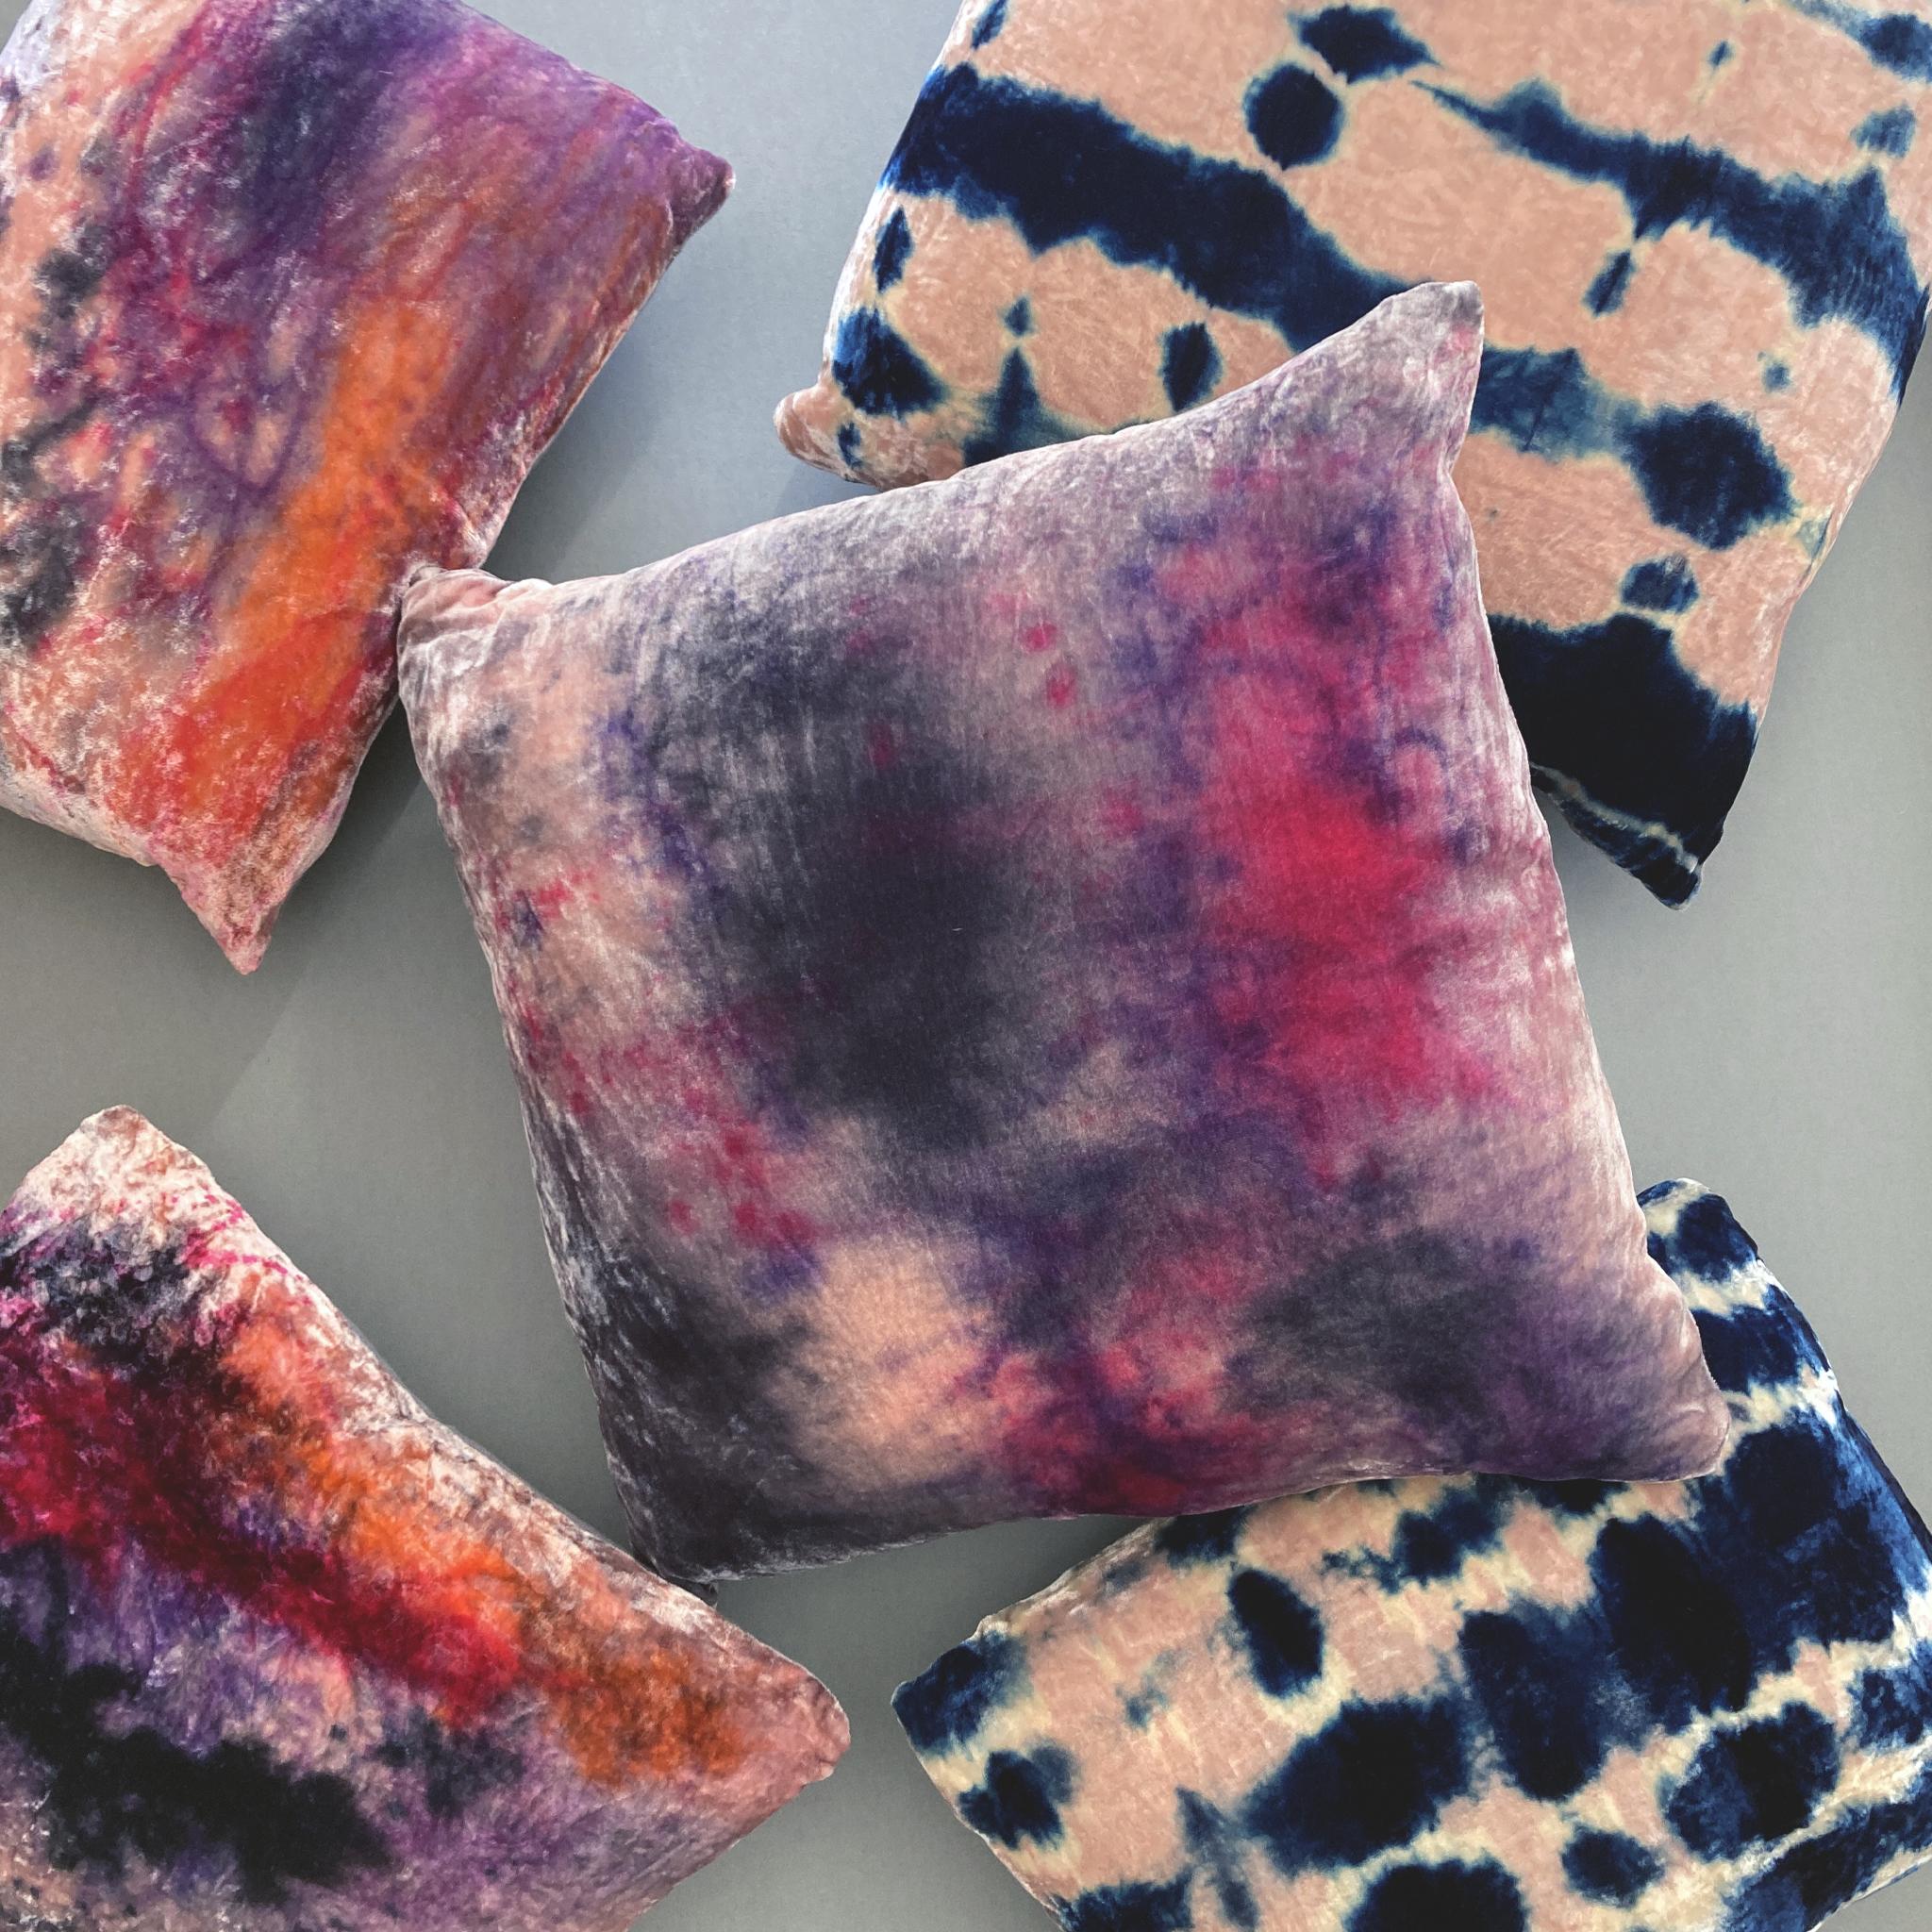 Rose velvet pillow dyed with Blush, Lilac, Navy and Magenta in an abstract pattern with gray linen backing. Hand-painted and sewn in New York City, down pillow insert made locally in NYC. Pillow measures 18 x 18 inches. Each velvet pillow is